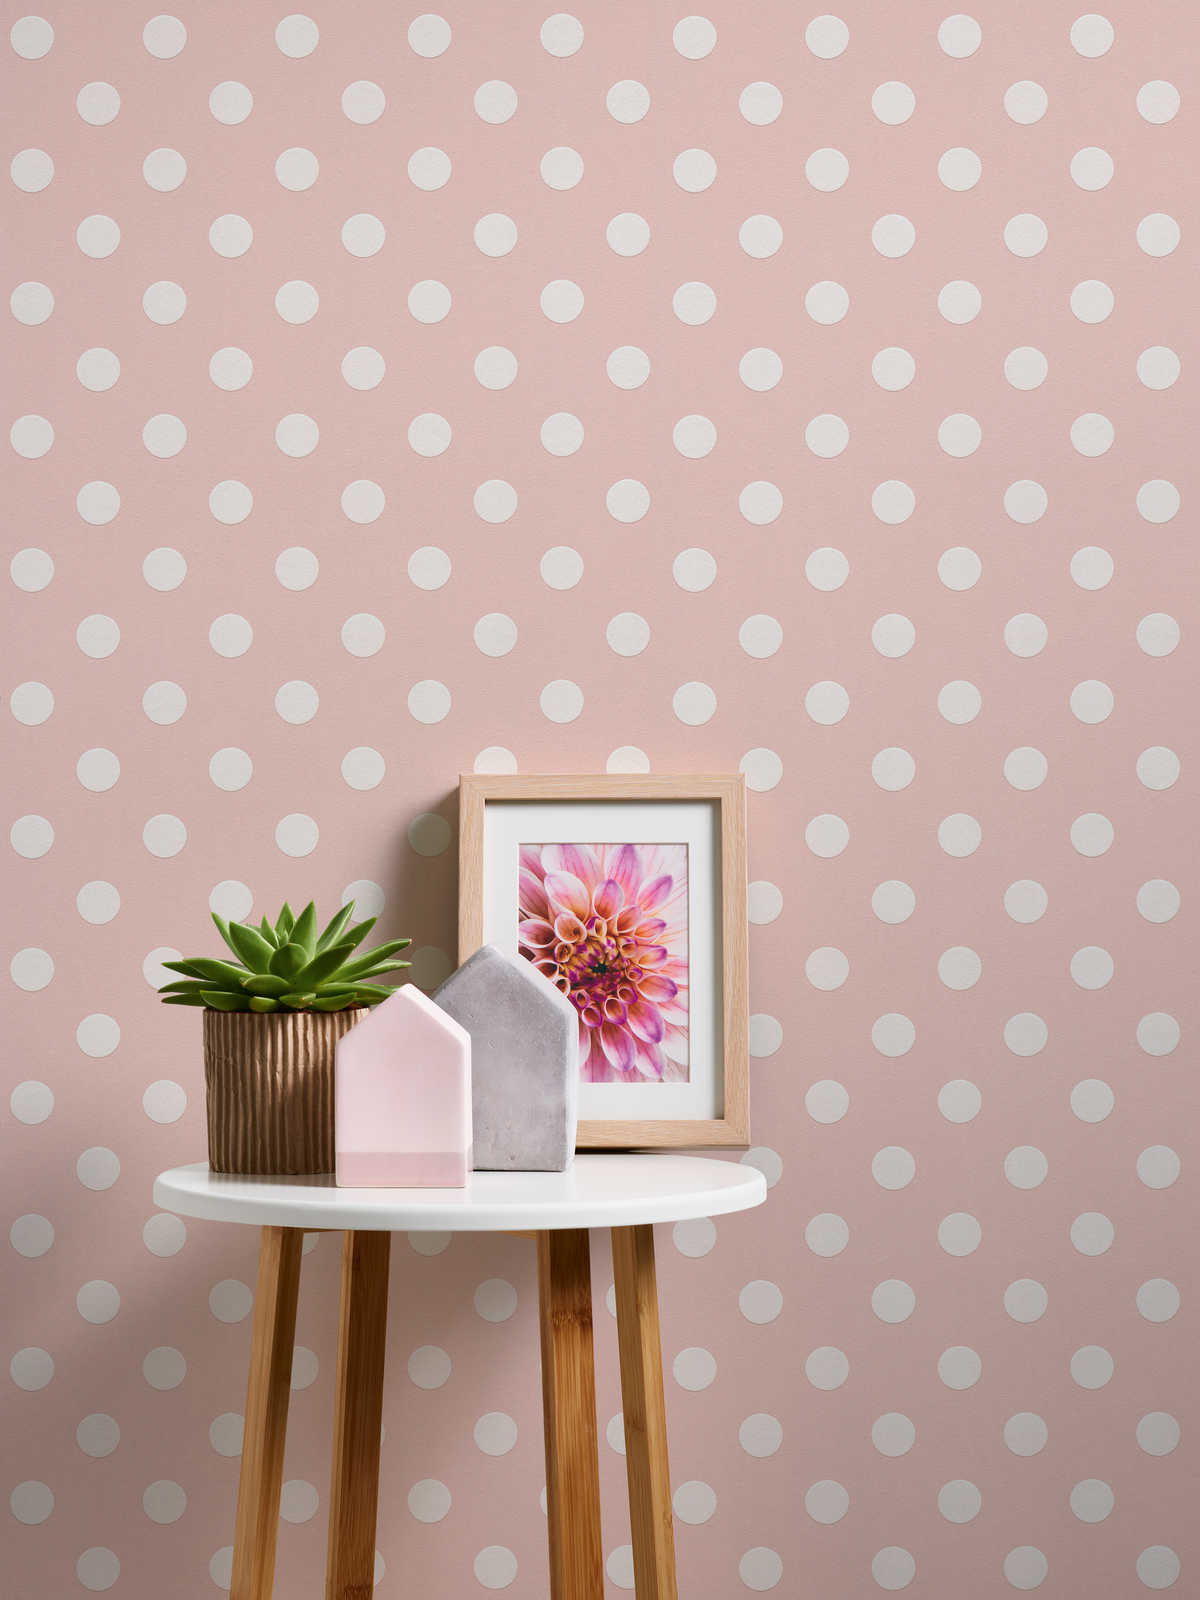             Pink dots wallpaper, polka dots for girls room - pink, white
        